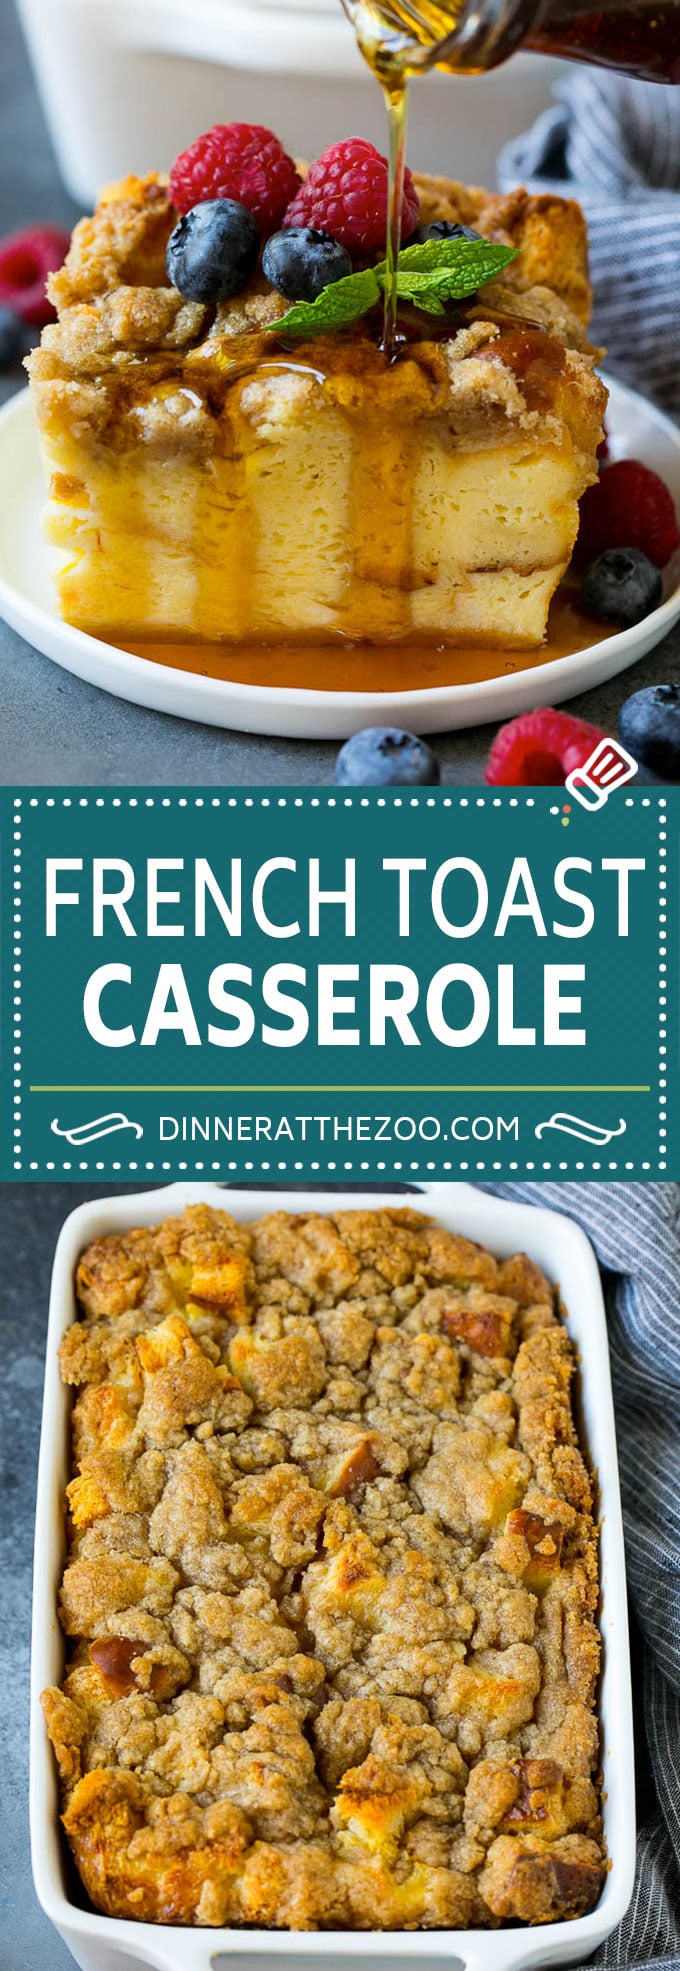 French Toast Casserole Recipe | French Toast Bake #frenchtoast #casserole #breakfast #brunch #dinneratthezoo #bread